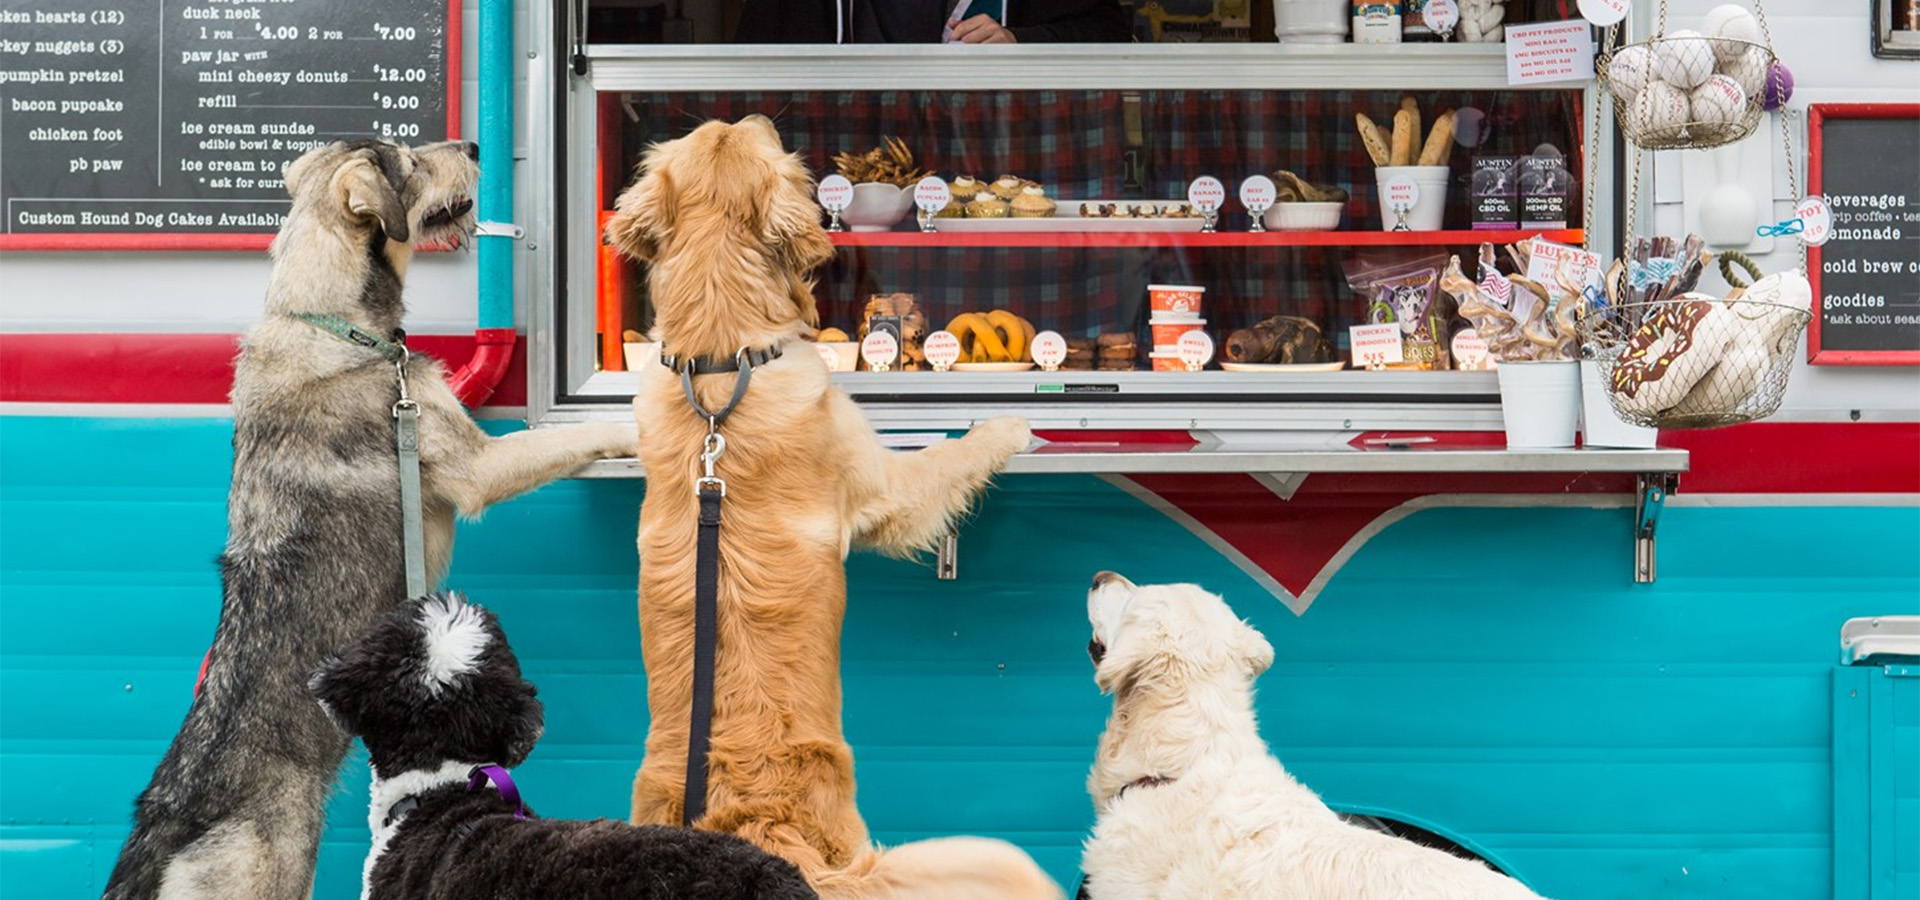 Image of dogs waiting for treats